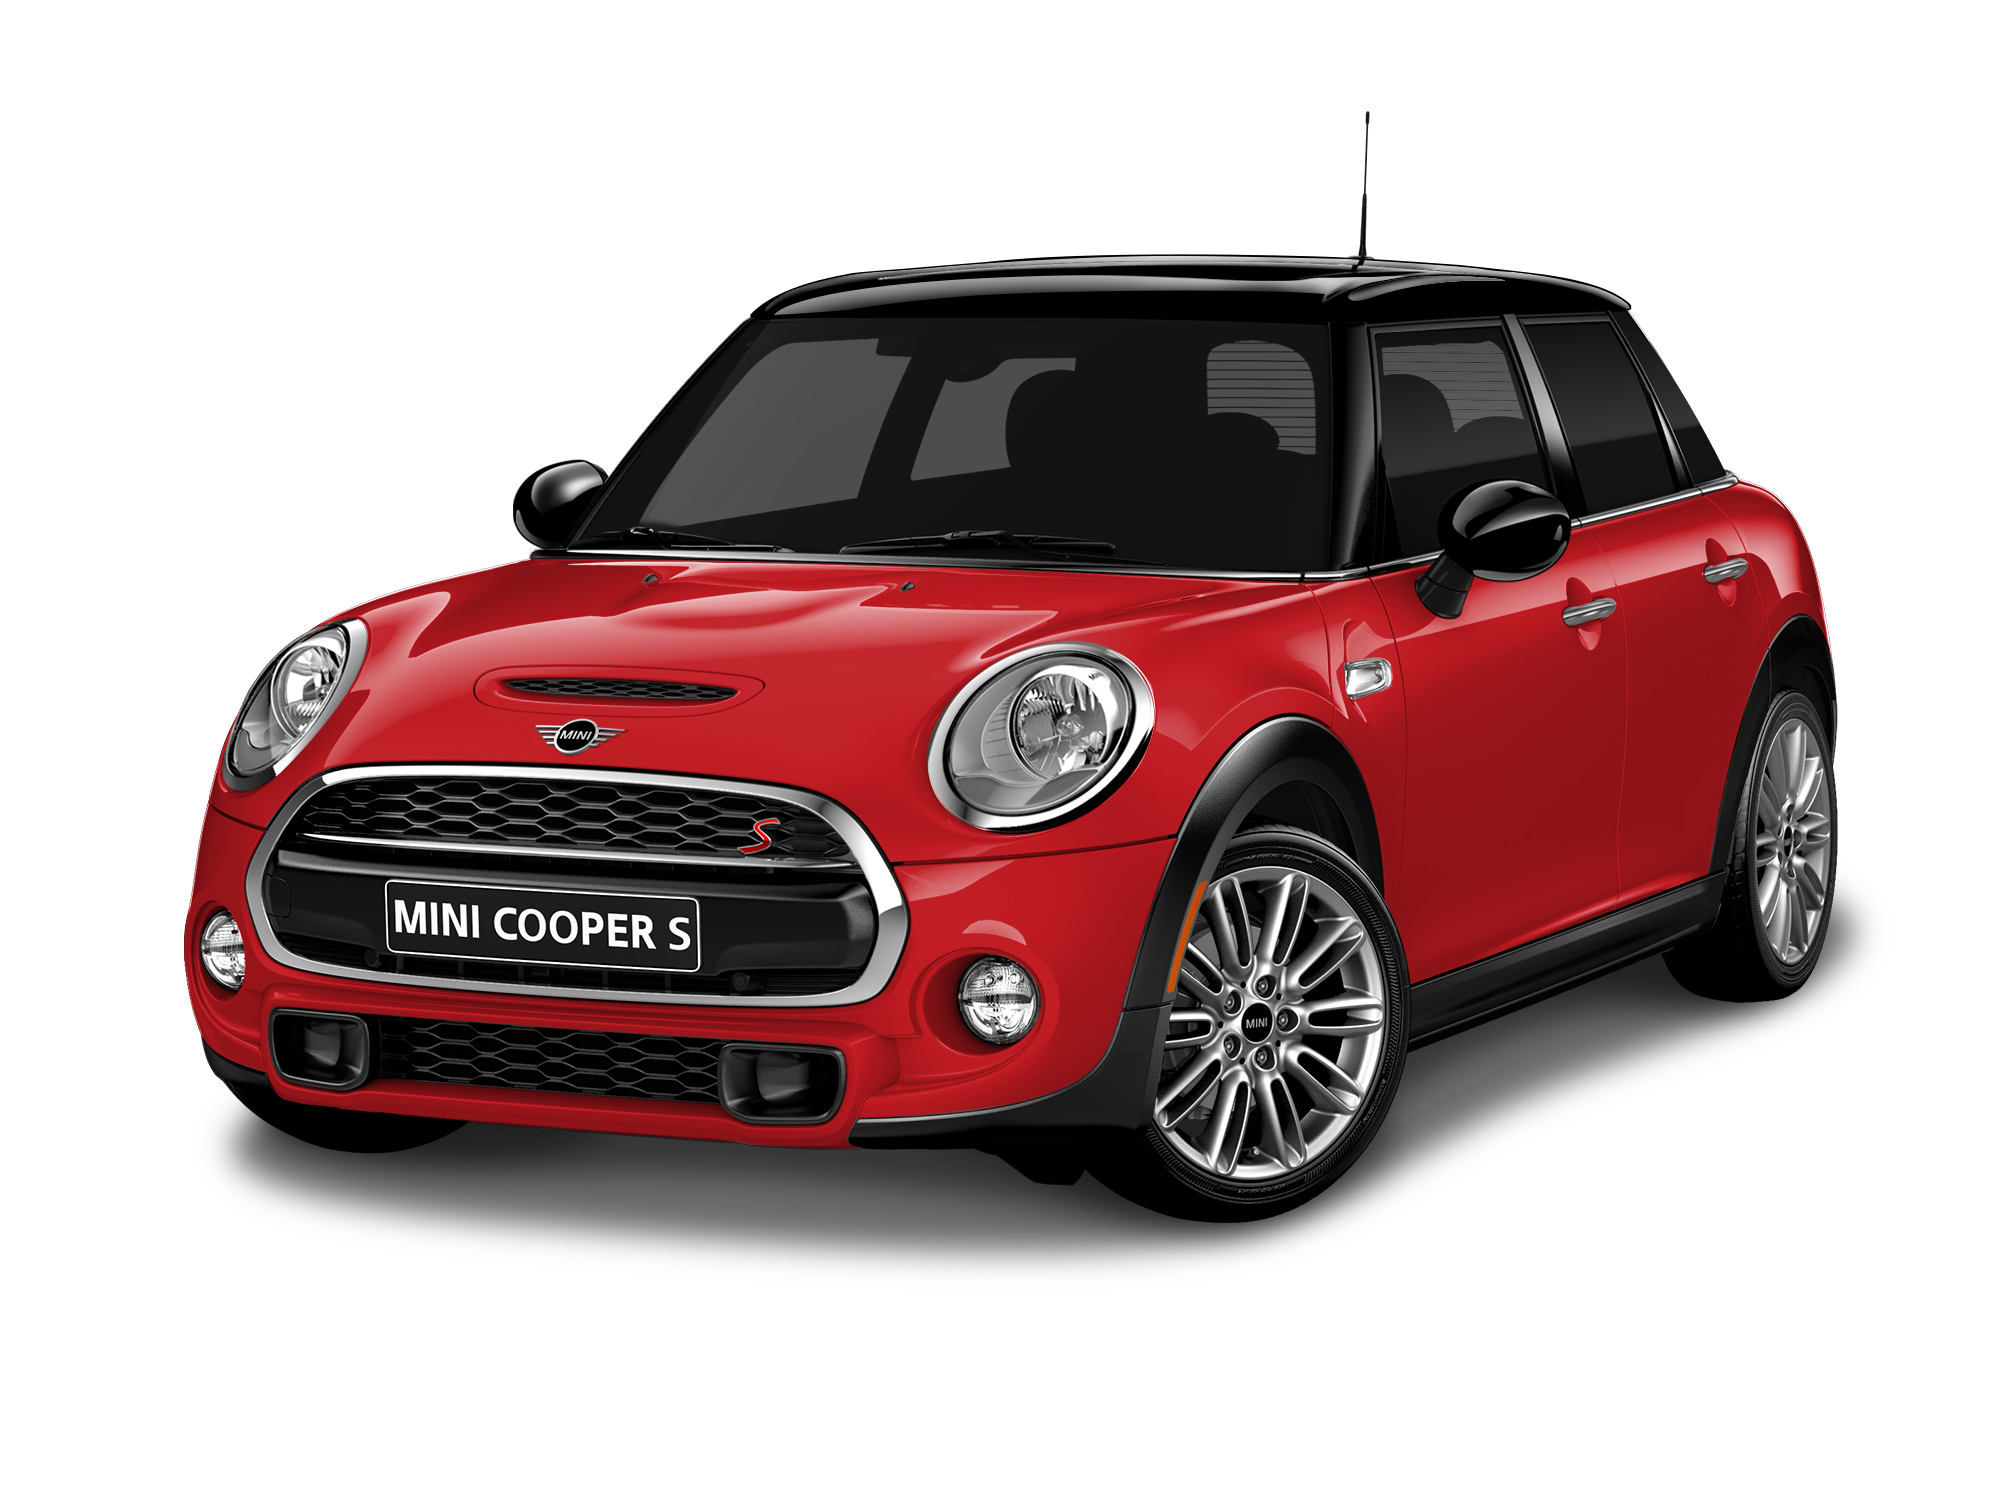 Brentwood Chili Red 2019 MINI Cooper S Hardtop 4 Door Signature New Car for Sale K2H88513